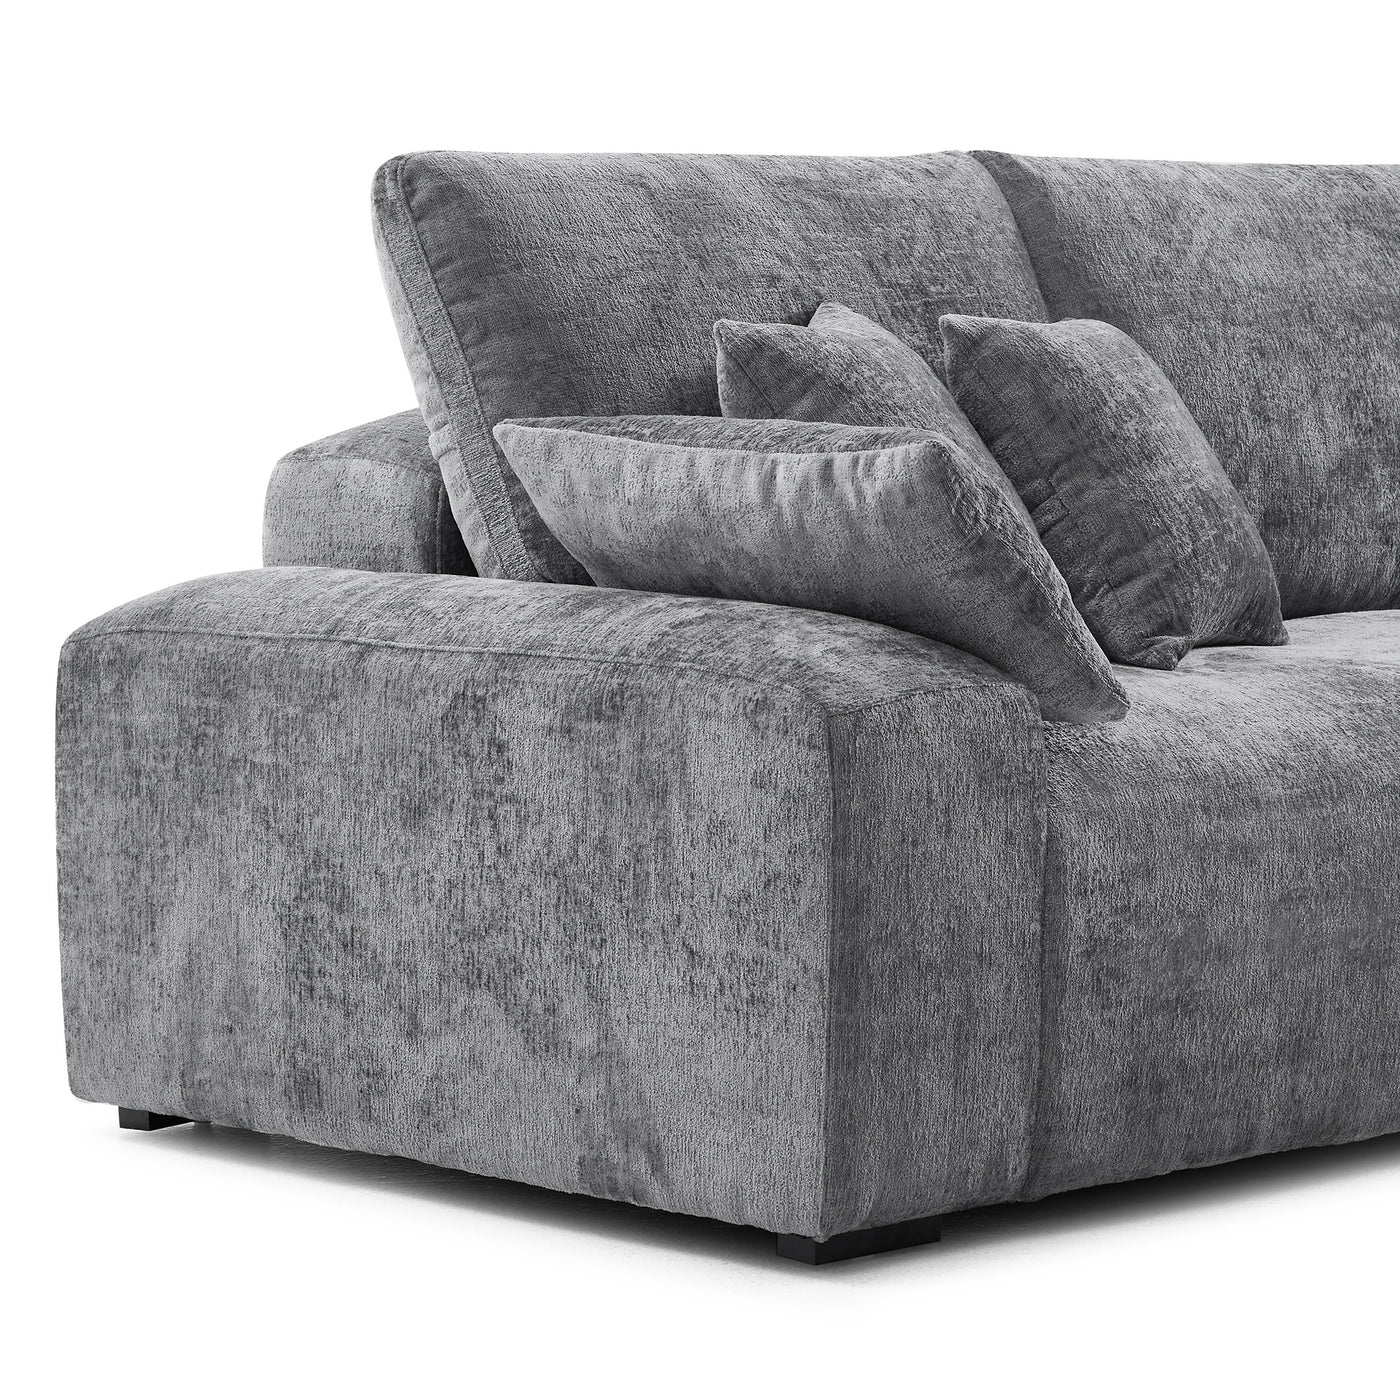 The Empress Camel Sectional-Gray